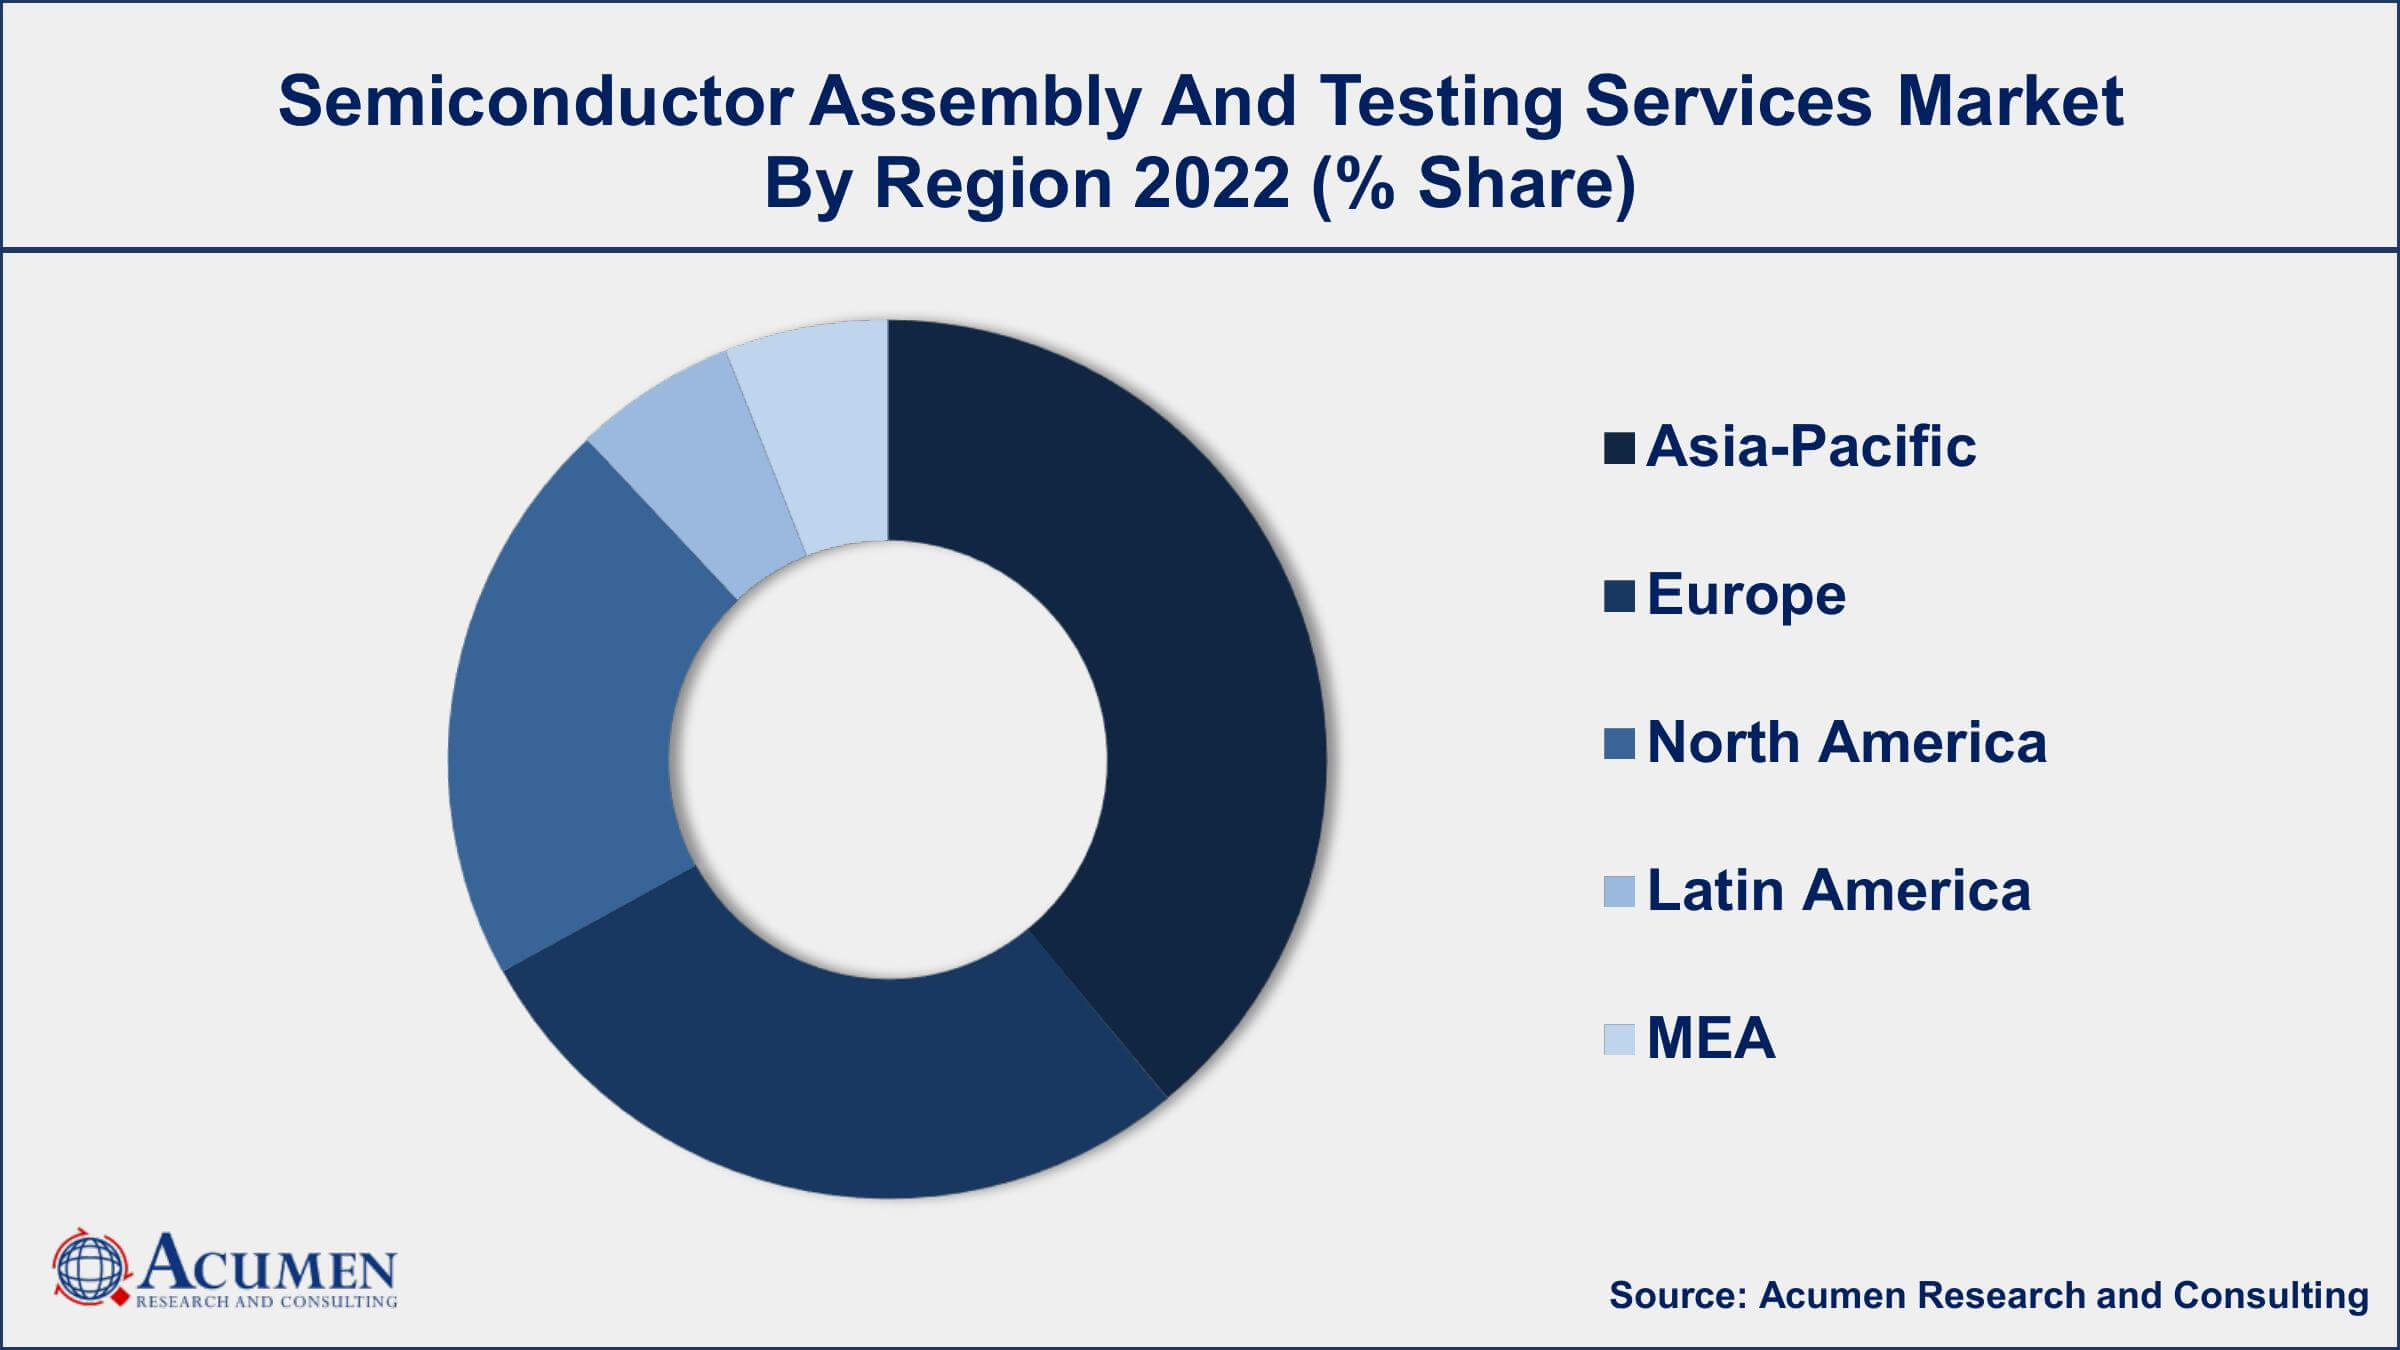 Semiconductor Assembly and Testing Services Market Drivers